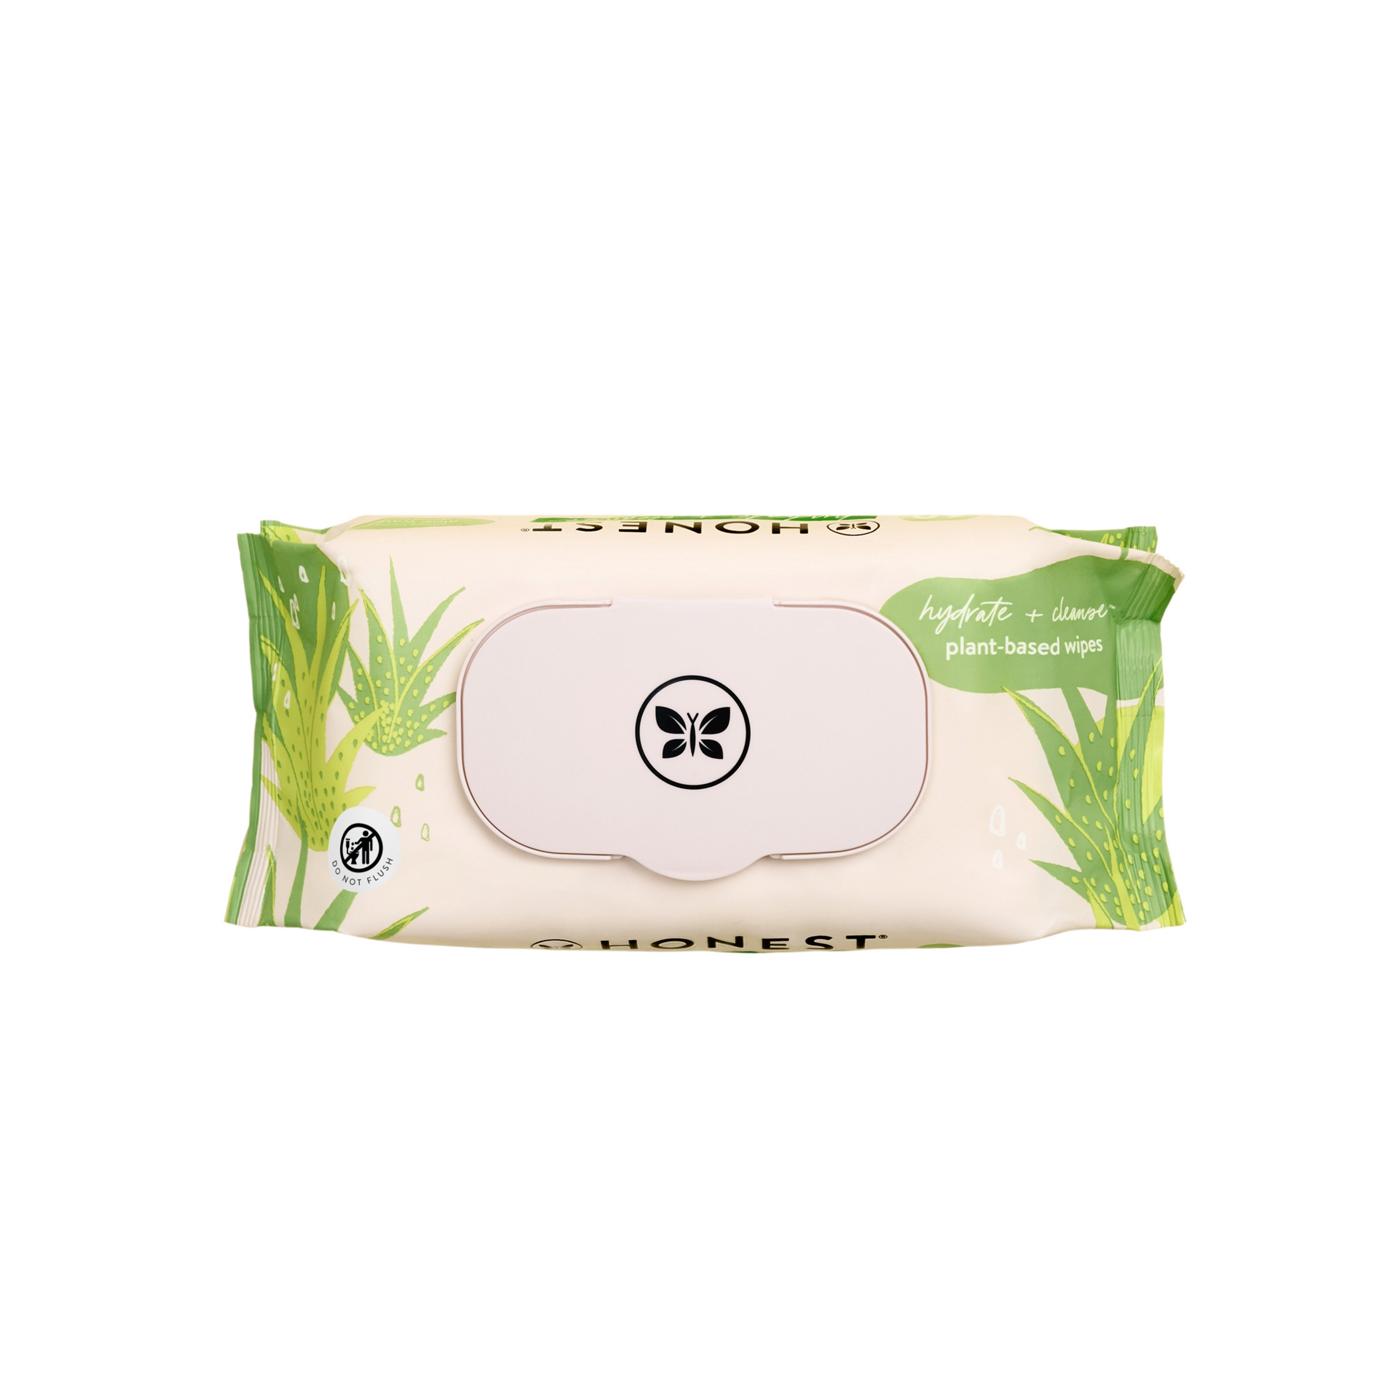 The Honest Company Nourish & Cleanse Baby Wipes; image 1 of 4